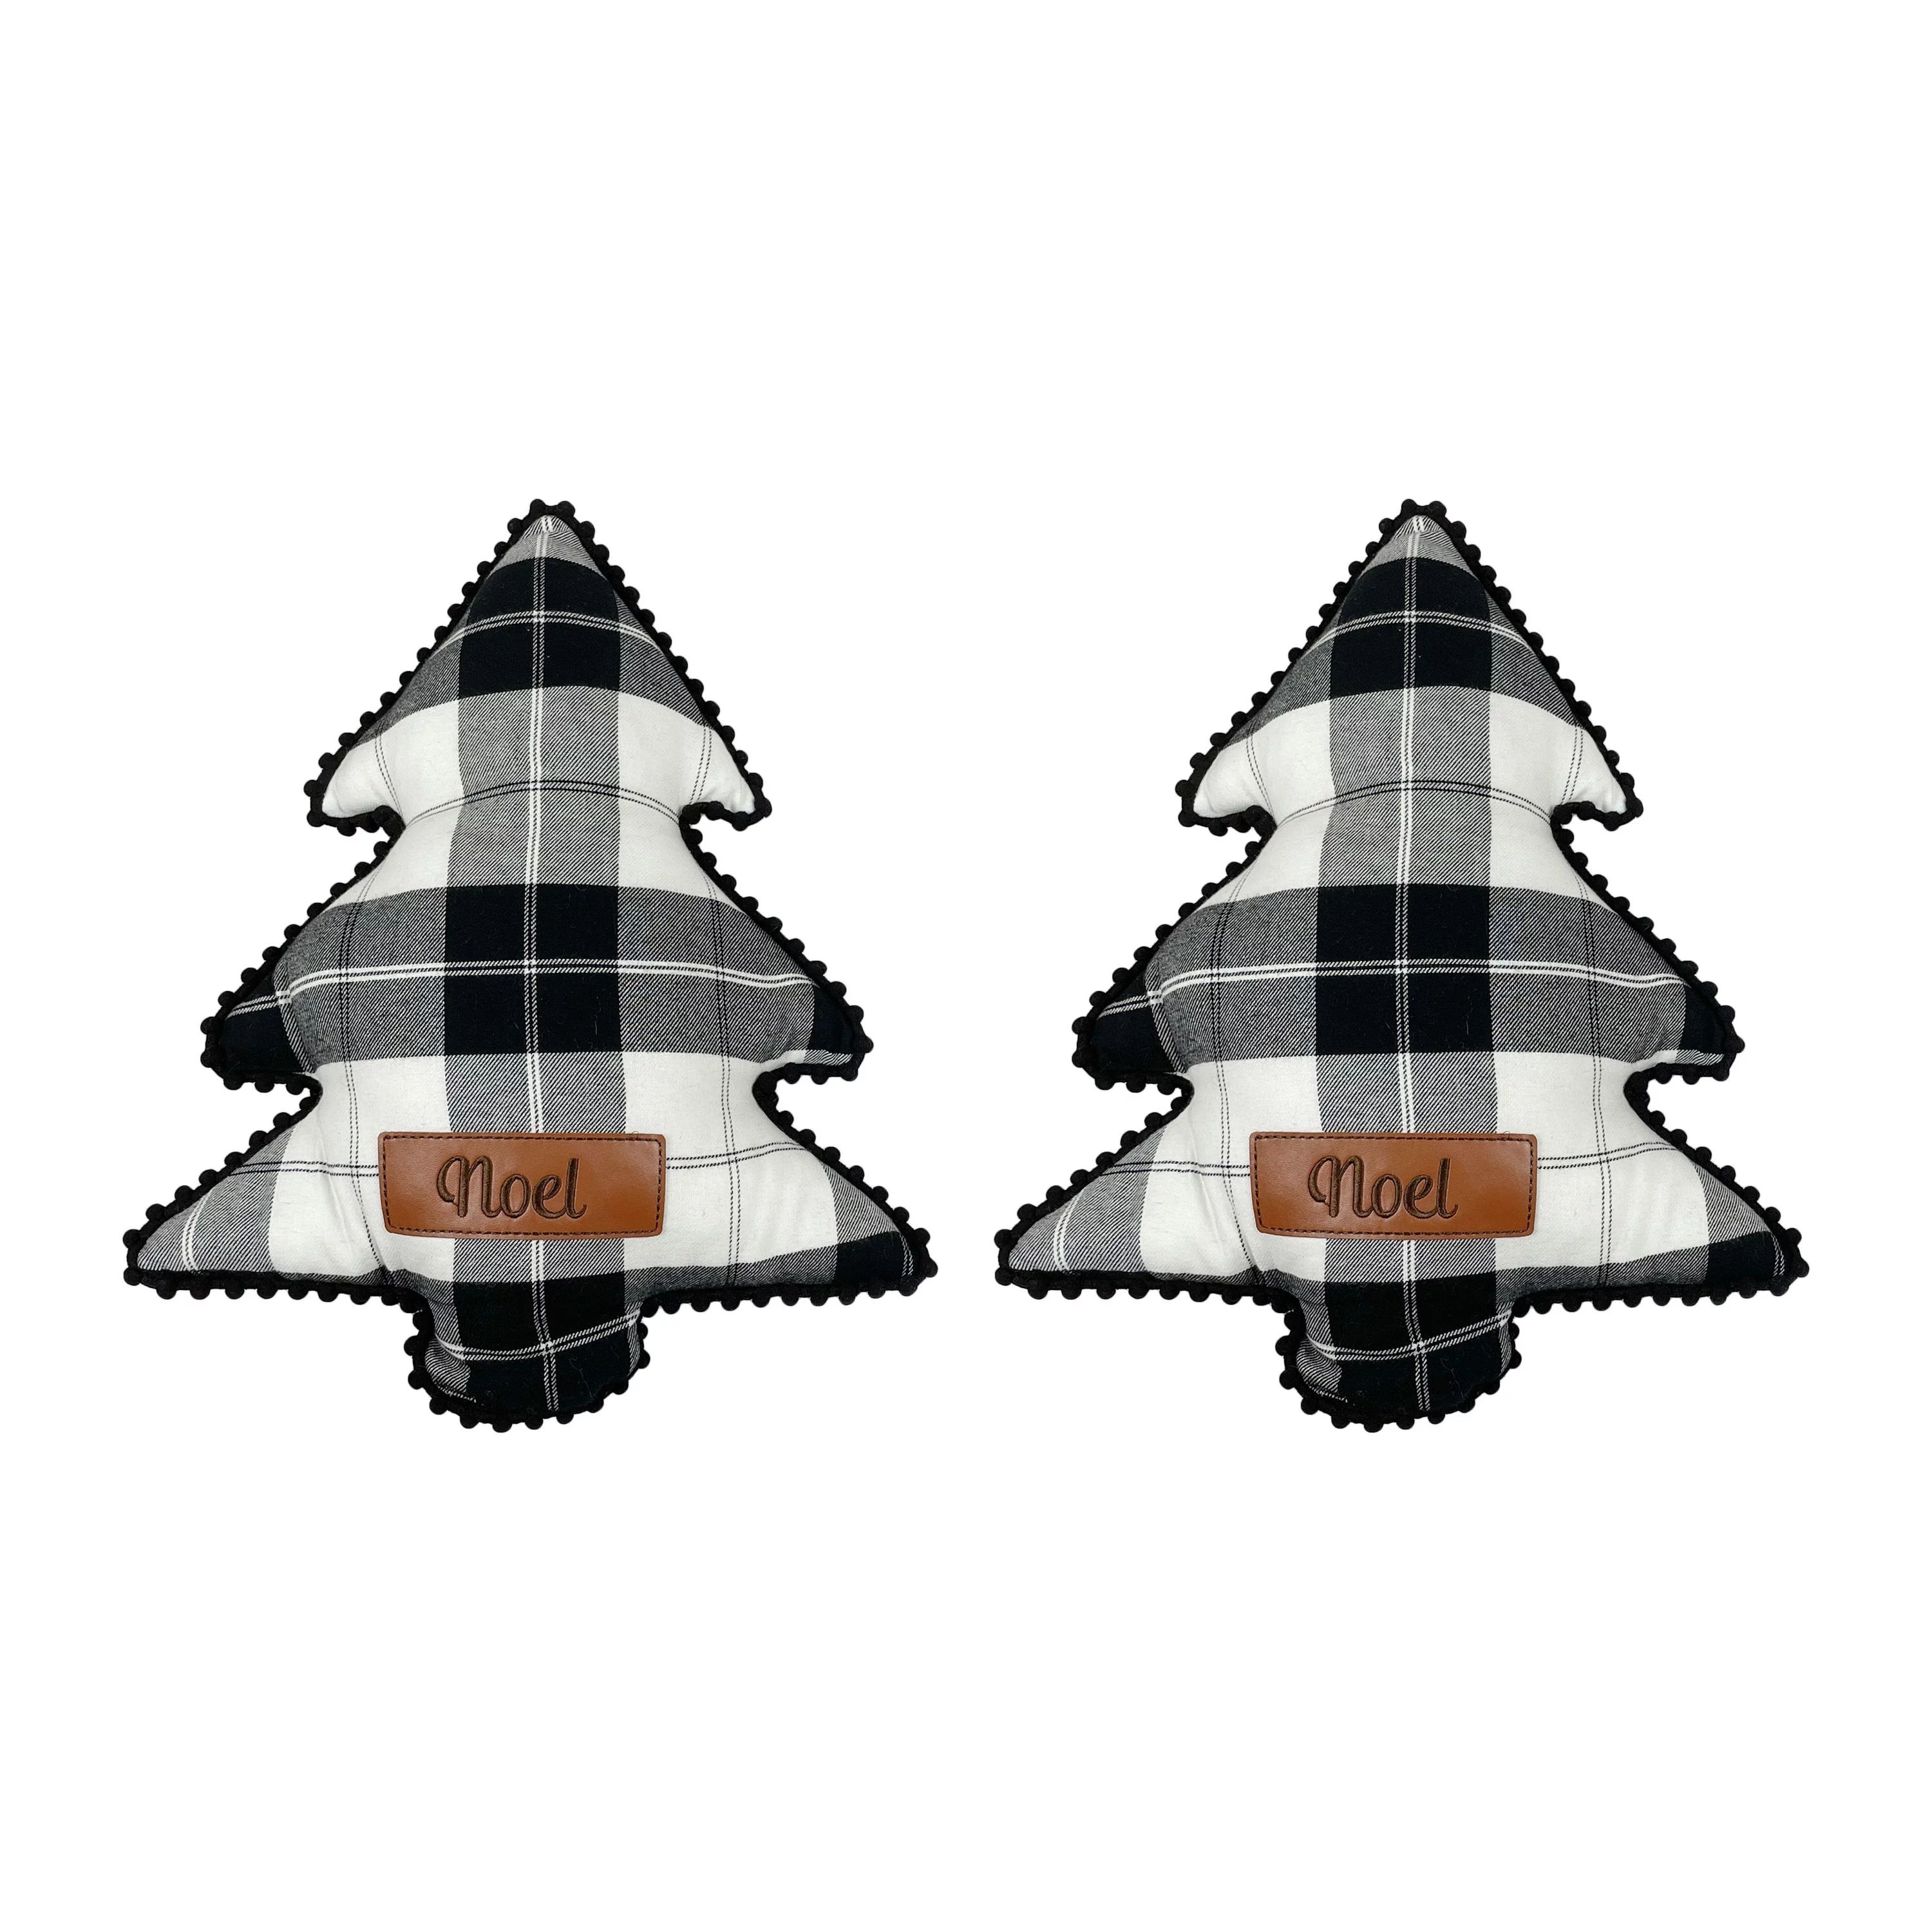 Holiday Time Tree Shaped Christmas Decorative Pillow, Black and White Plaid, 2 Count per Pack | Walmart (US)